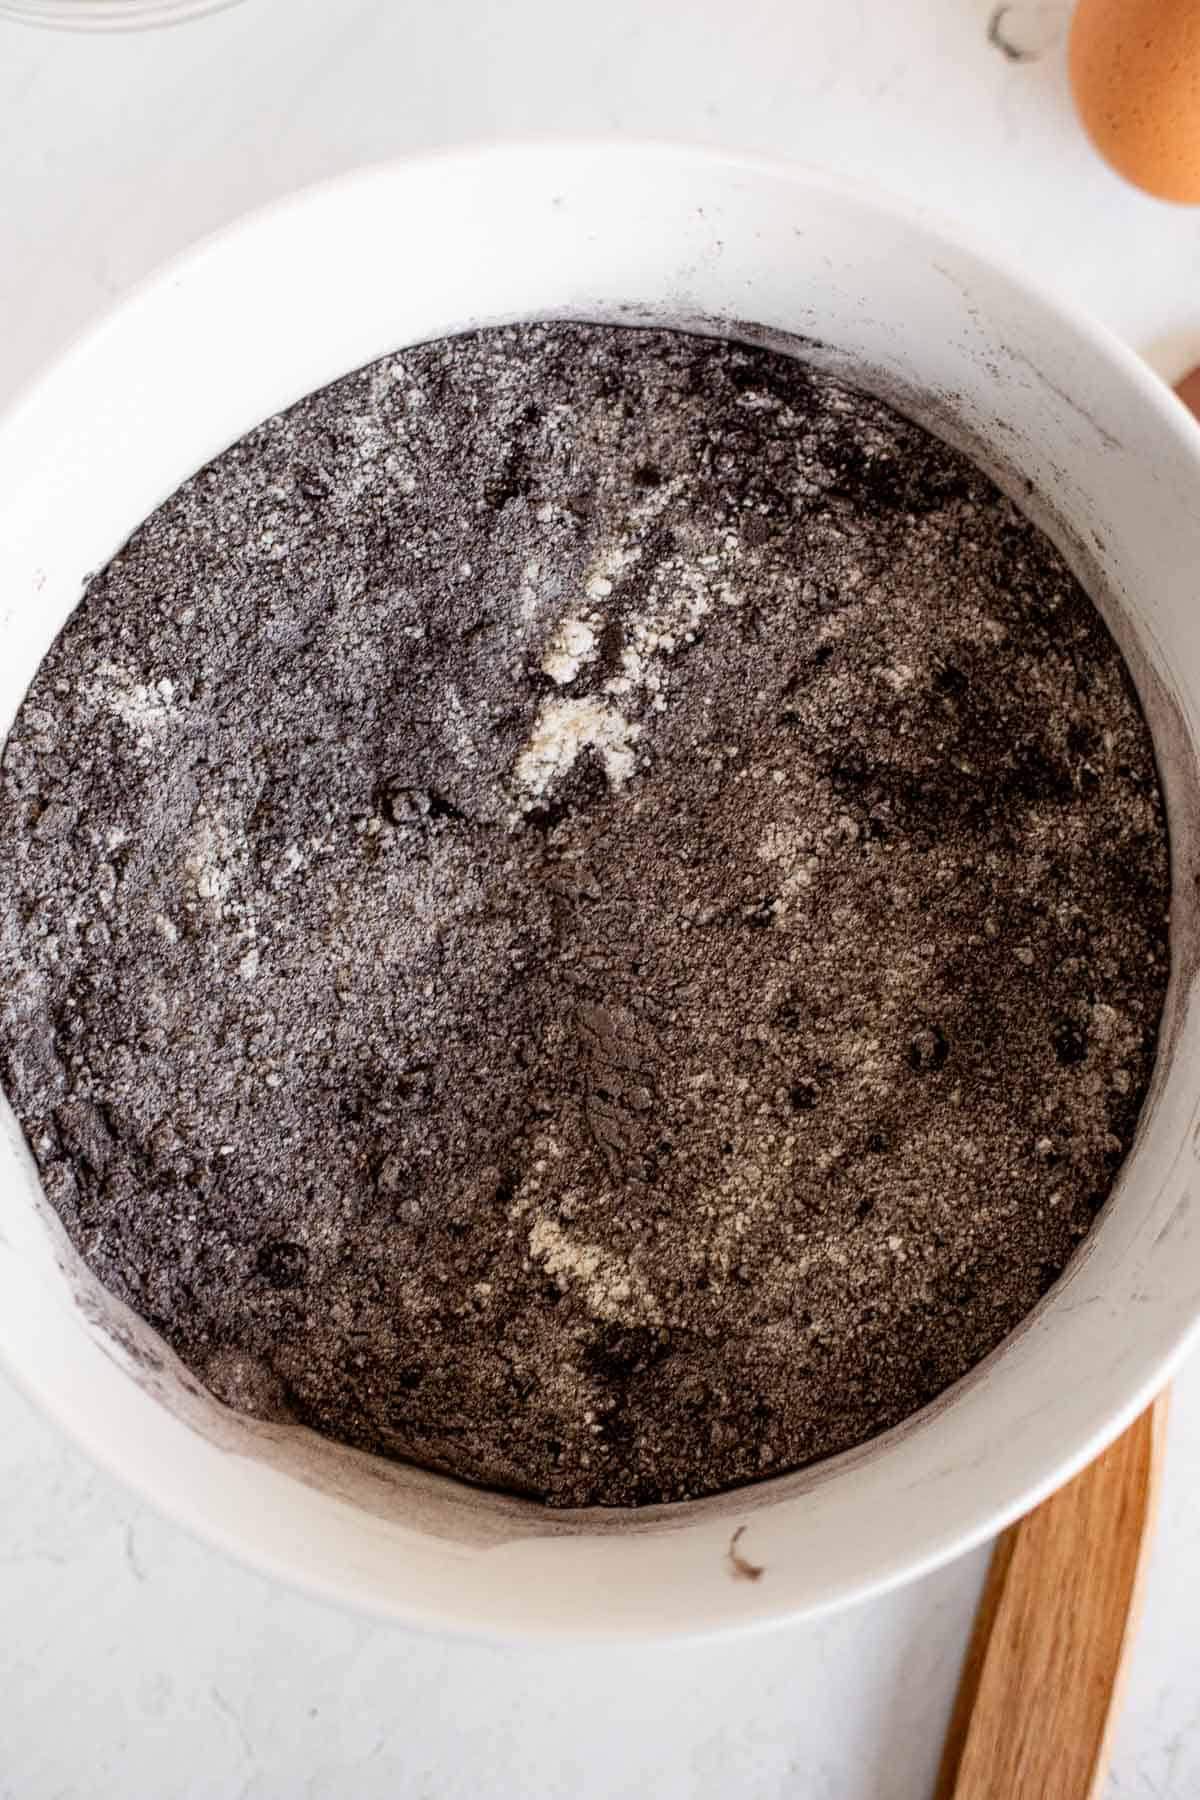 flour, sugar, and black cocoa powder whisked in a white mixing bowl.